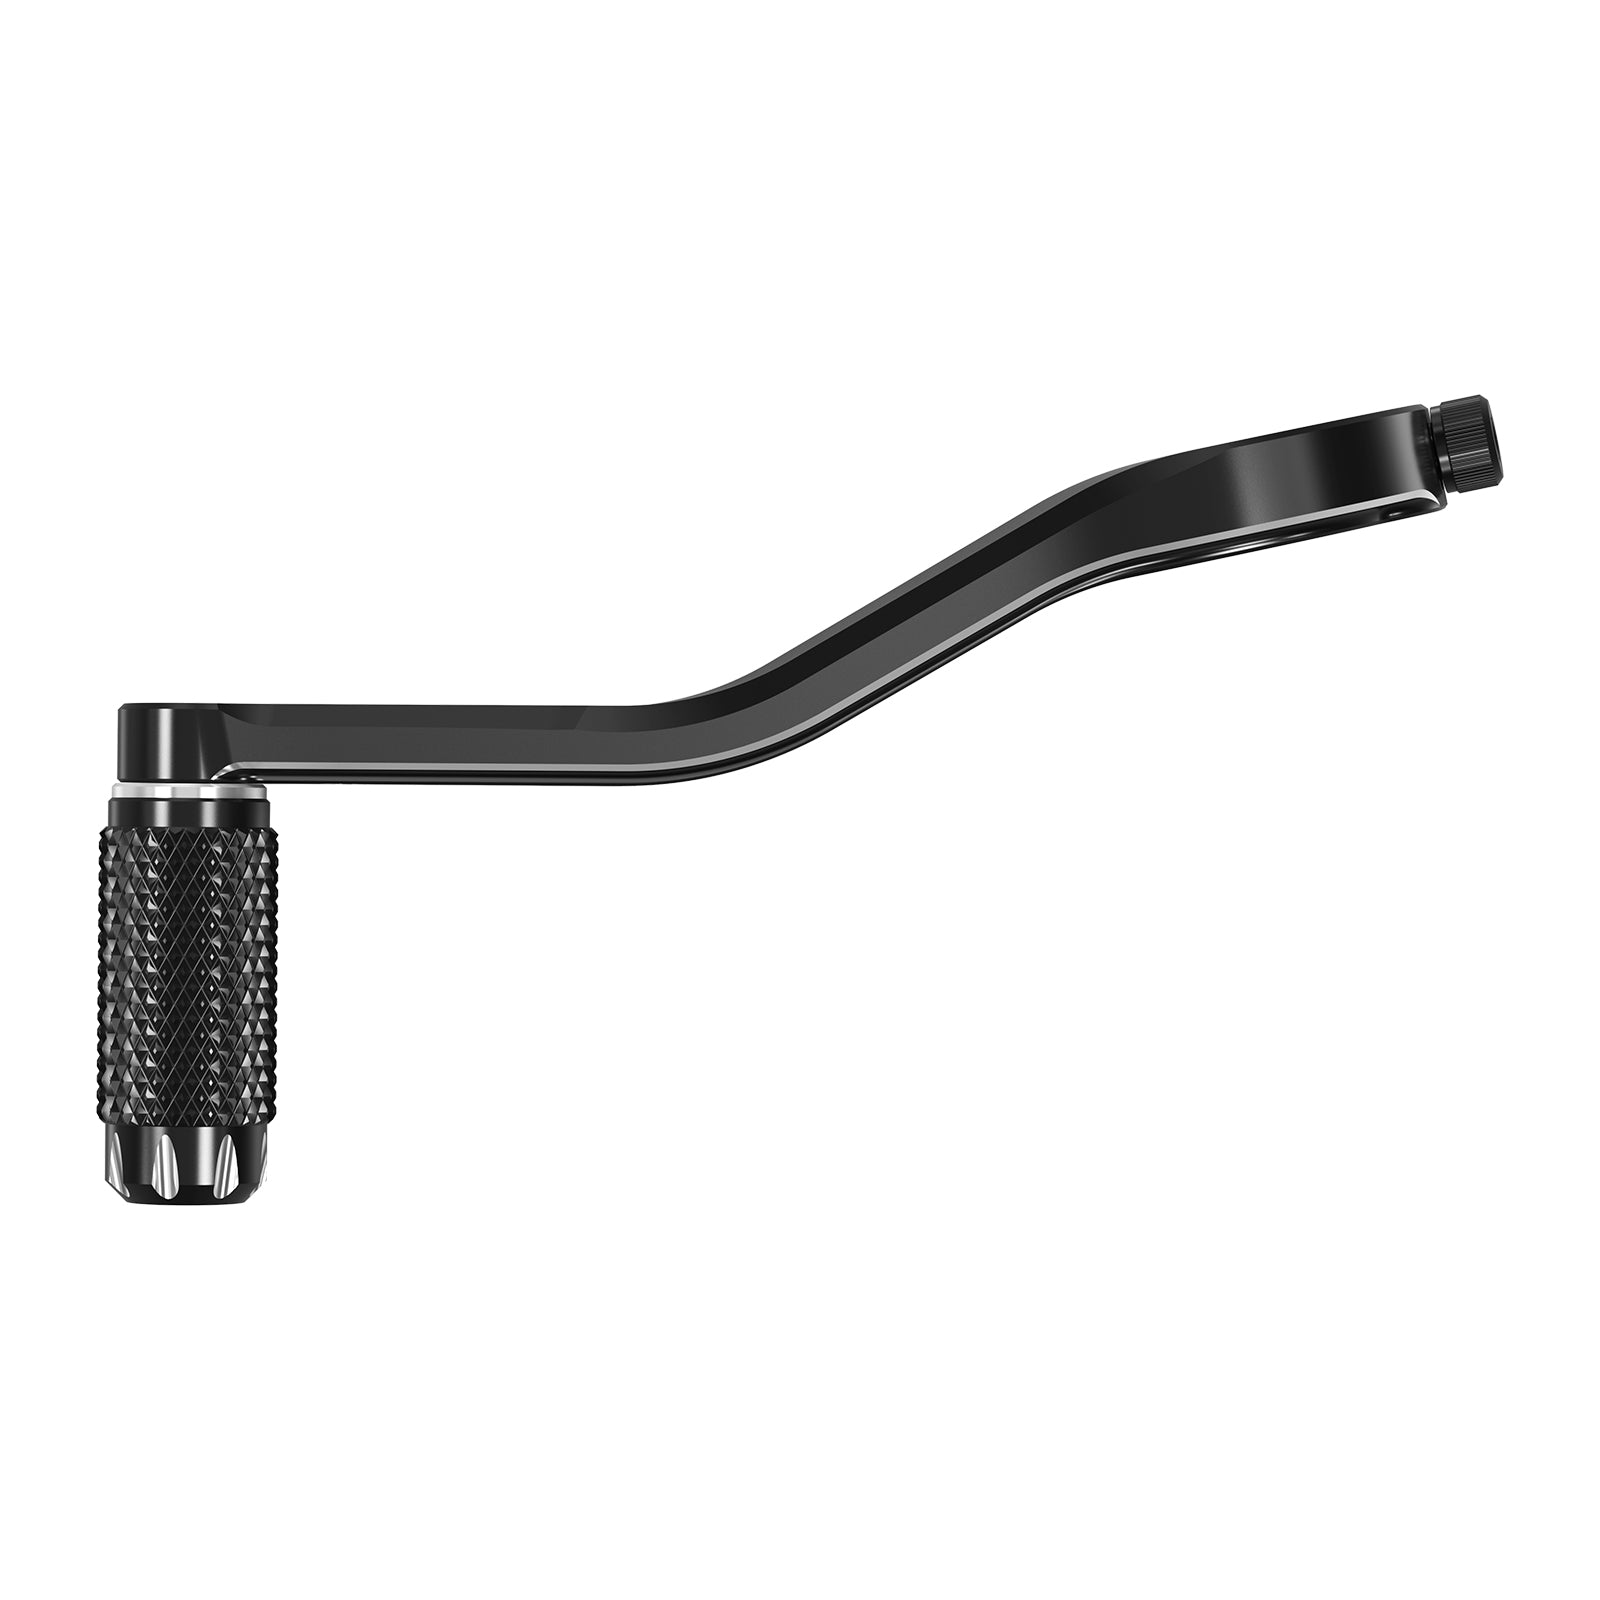 Gear Shift Lever with Peg For Harley Davidson Breakout Dyna Street Bob